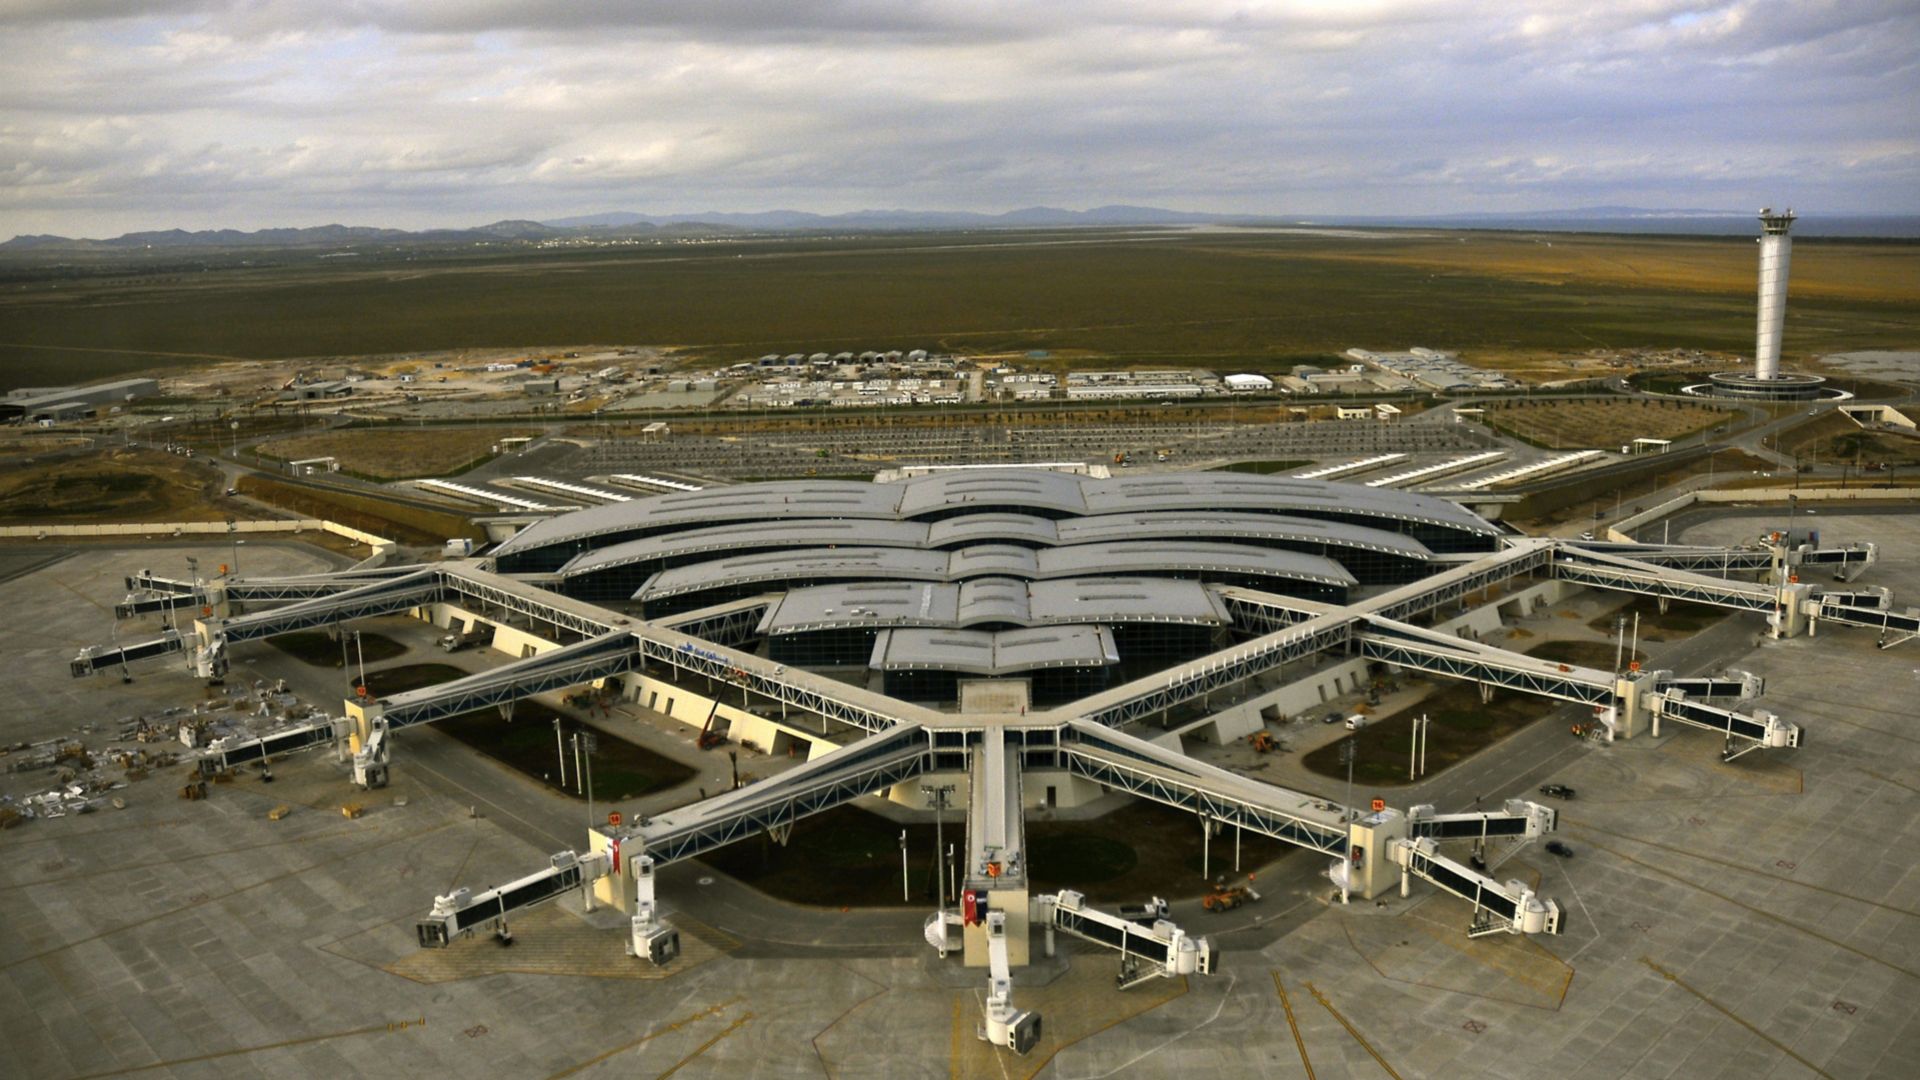 Terminal Building of the Enfidha Airport in Tunisia